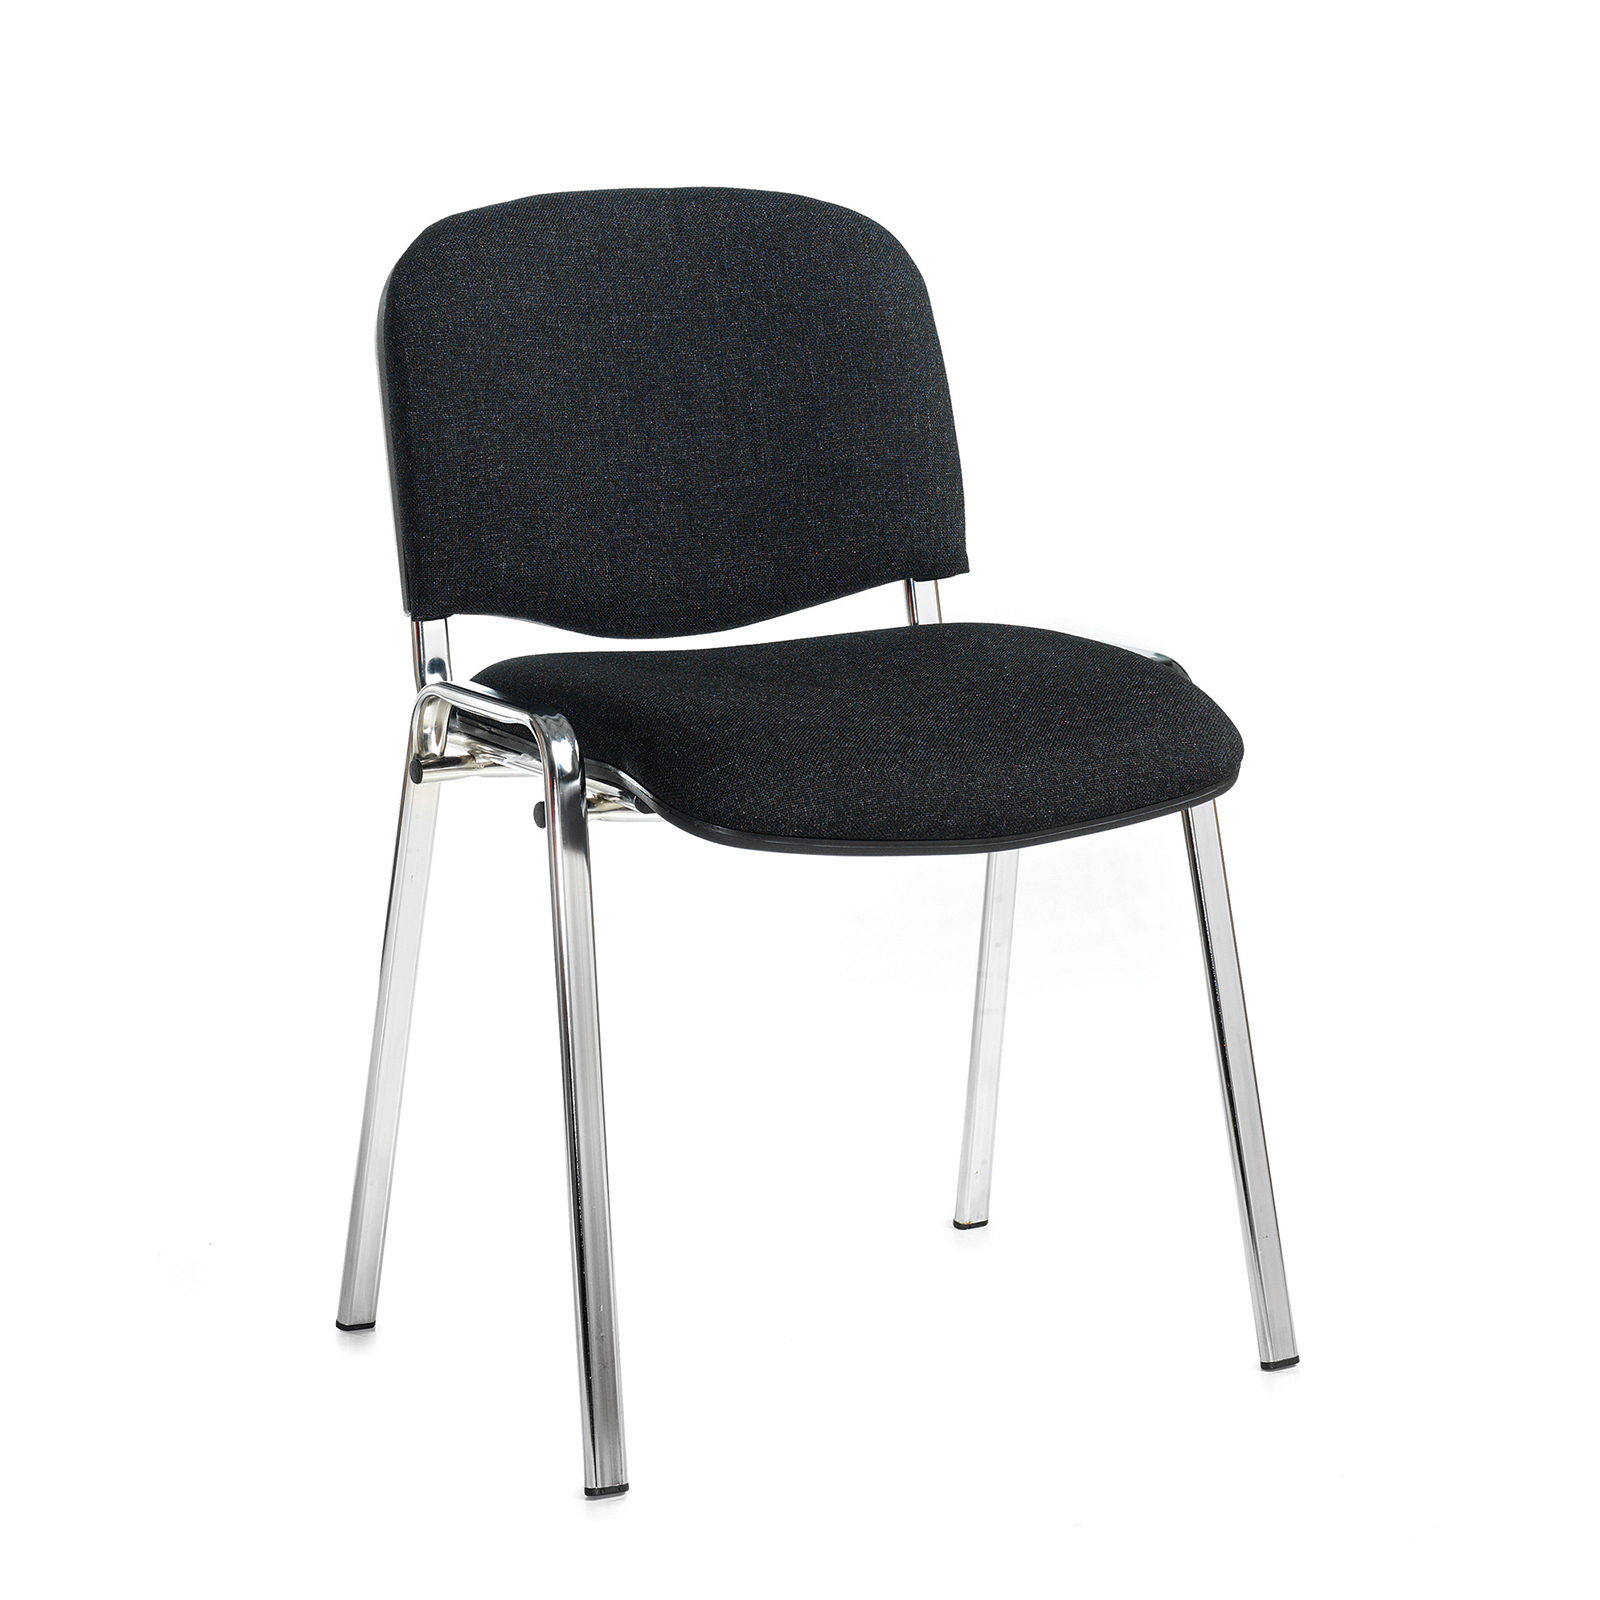 Boardroom / Meeting Taurus meeting room stackable chair with chrome frame and no arms - charcoal